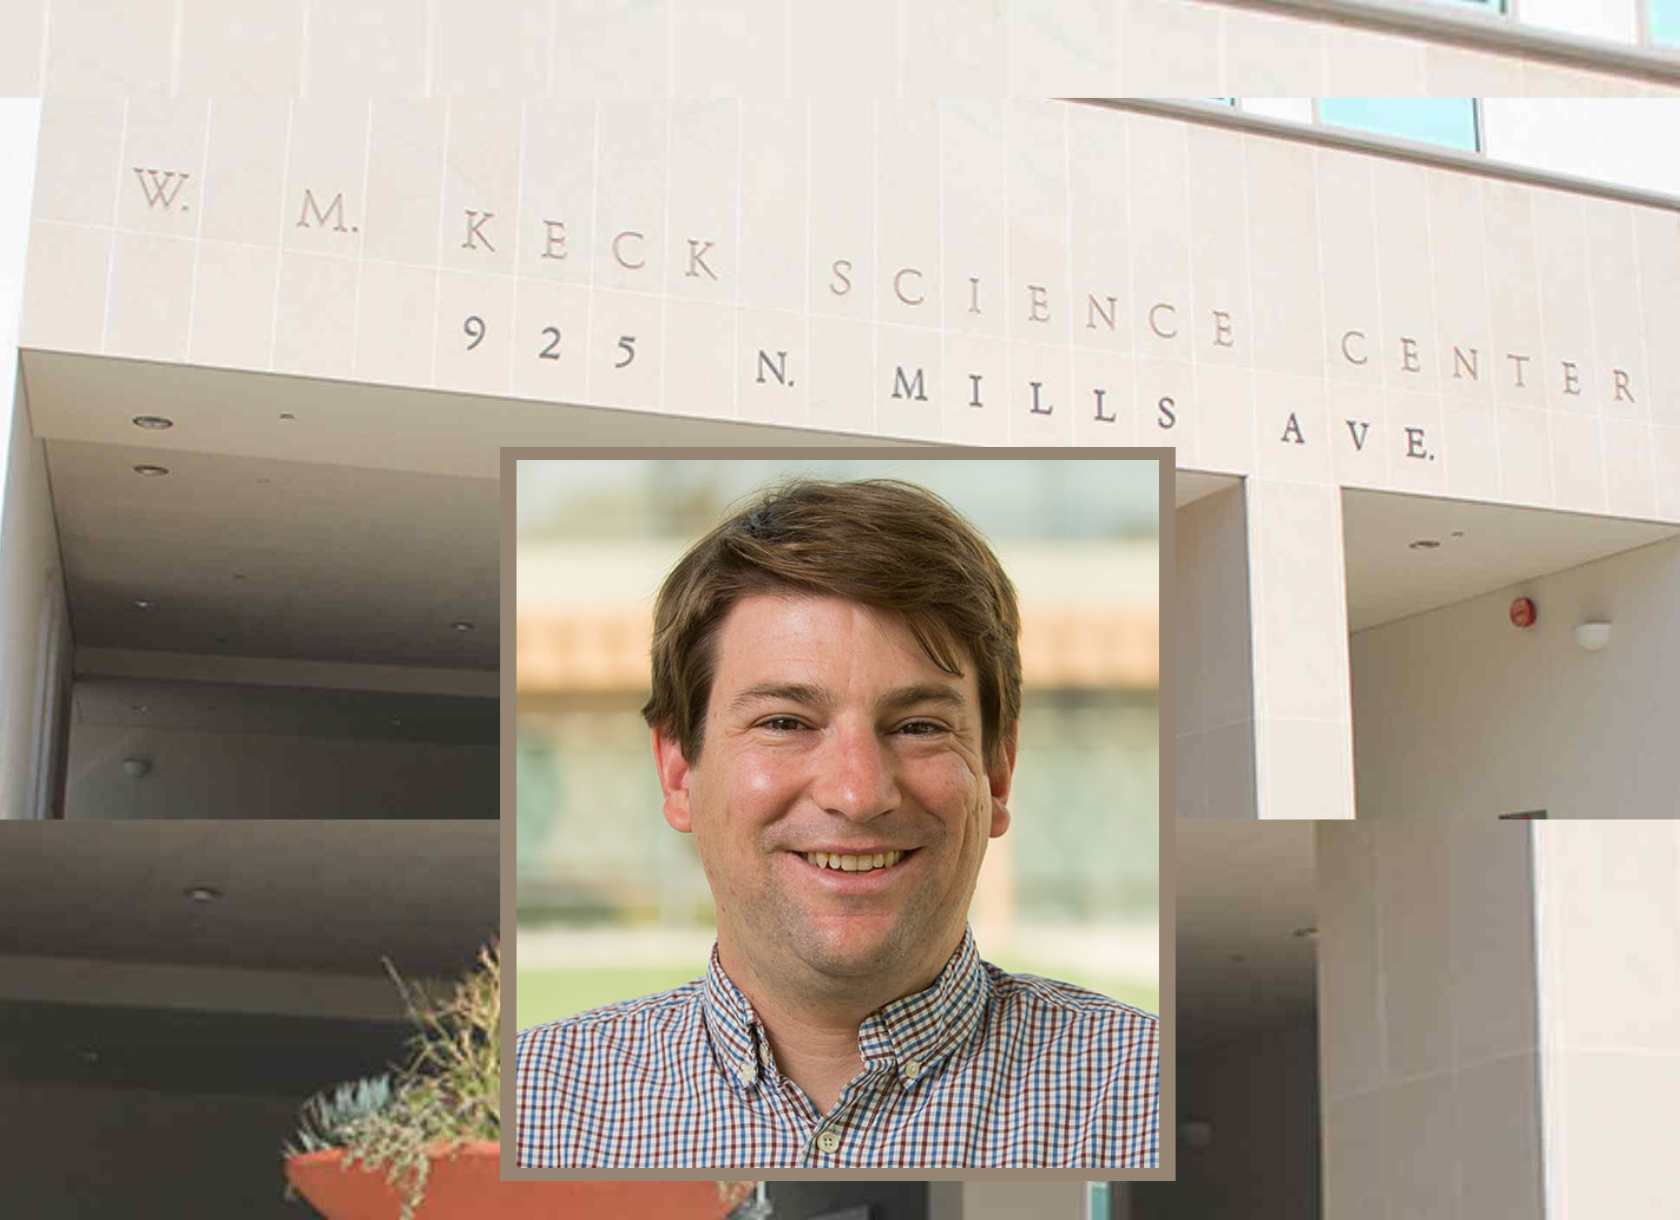 Portrait of Aaron Leconte superimposed on a photo of the W.M. Keck Science Department